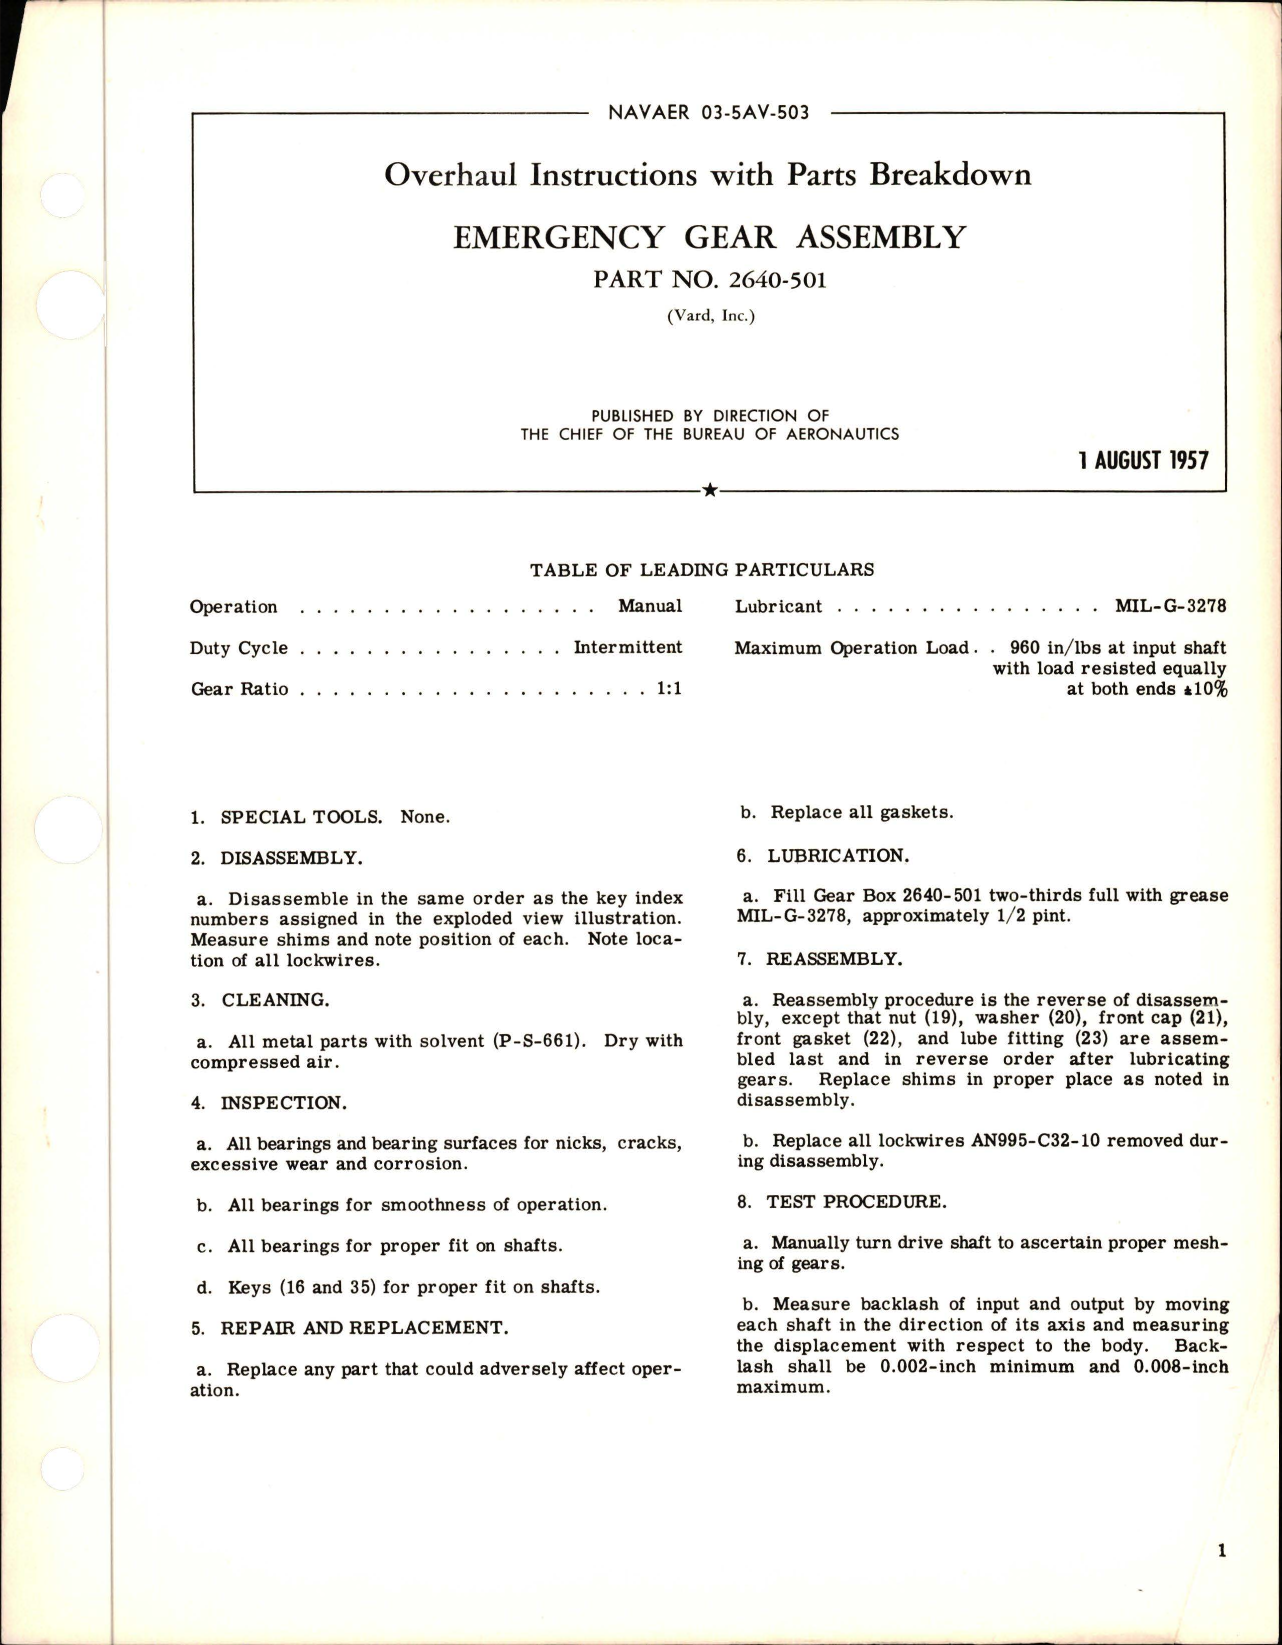 Sample page 1 from AirCorps Library document: Overhaul Instructions with Parts Breakdown for Emergency Gear Assembly - Part 2640-501 